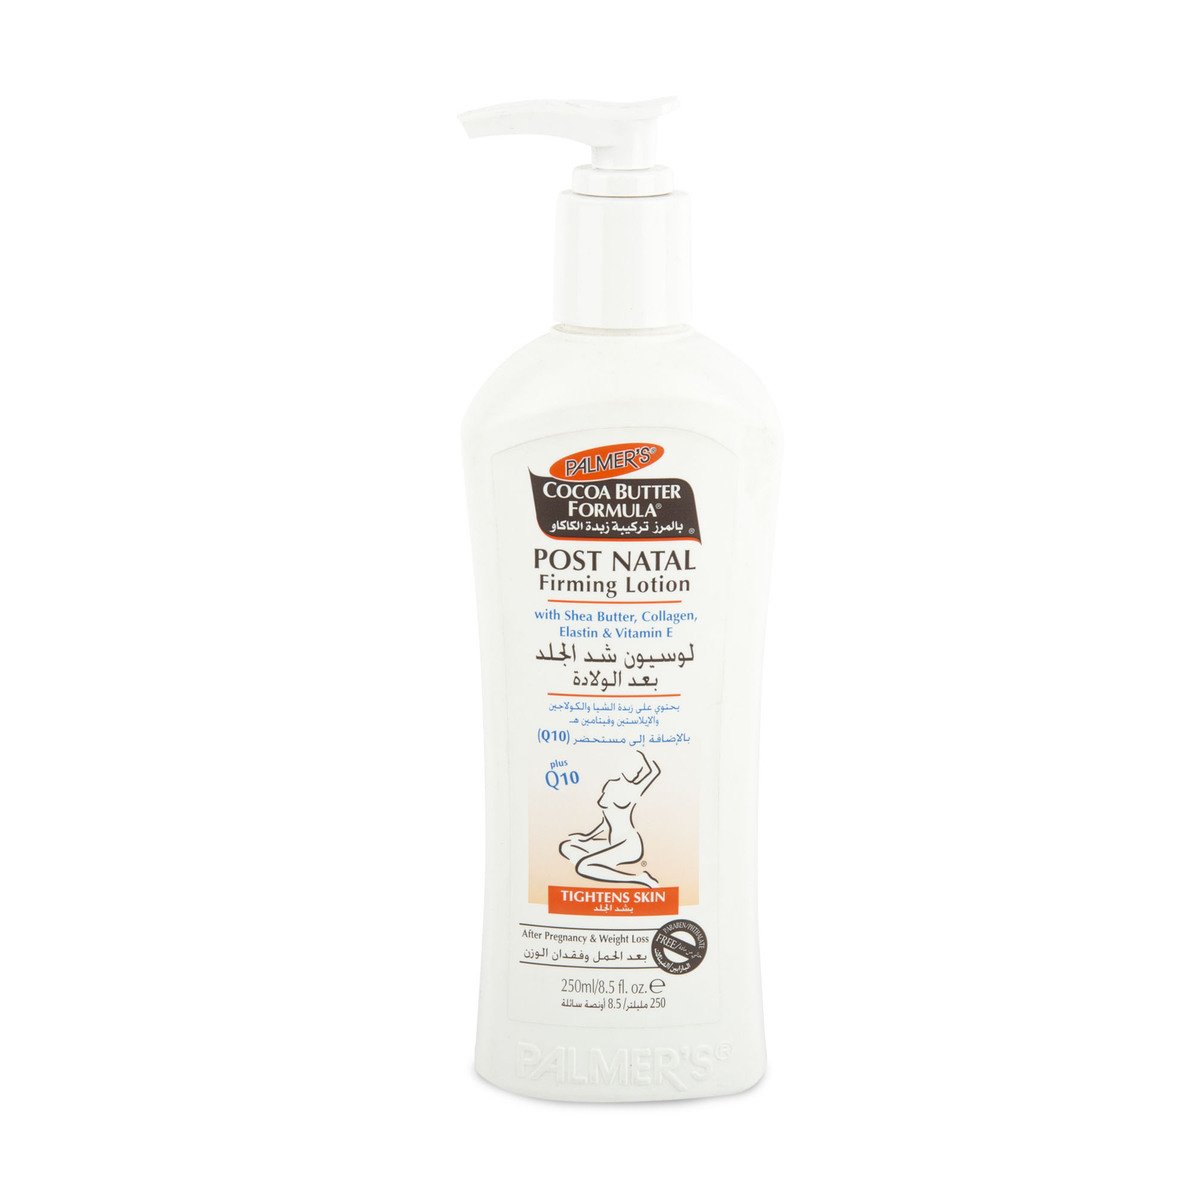 Palmer's Cocoa Butter Formula Post Natal Firming Lotion 250 ml